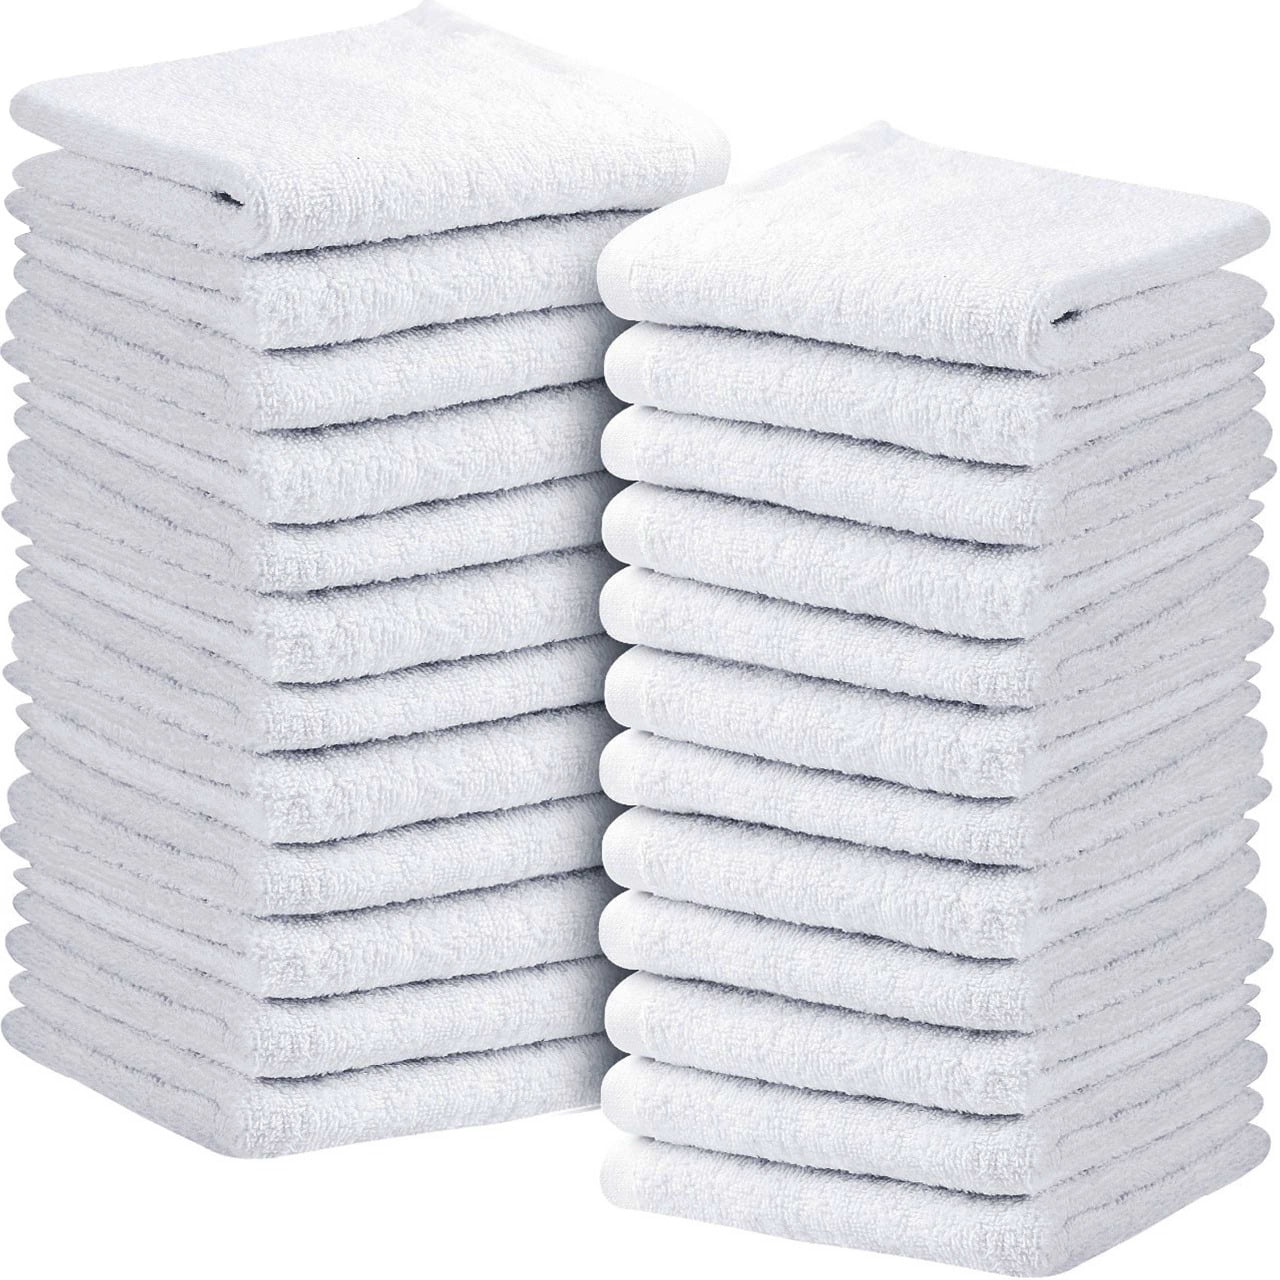 24 pack new white 12x12 100% cotton hotel gym cleaning washcloths wash cloths 